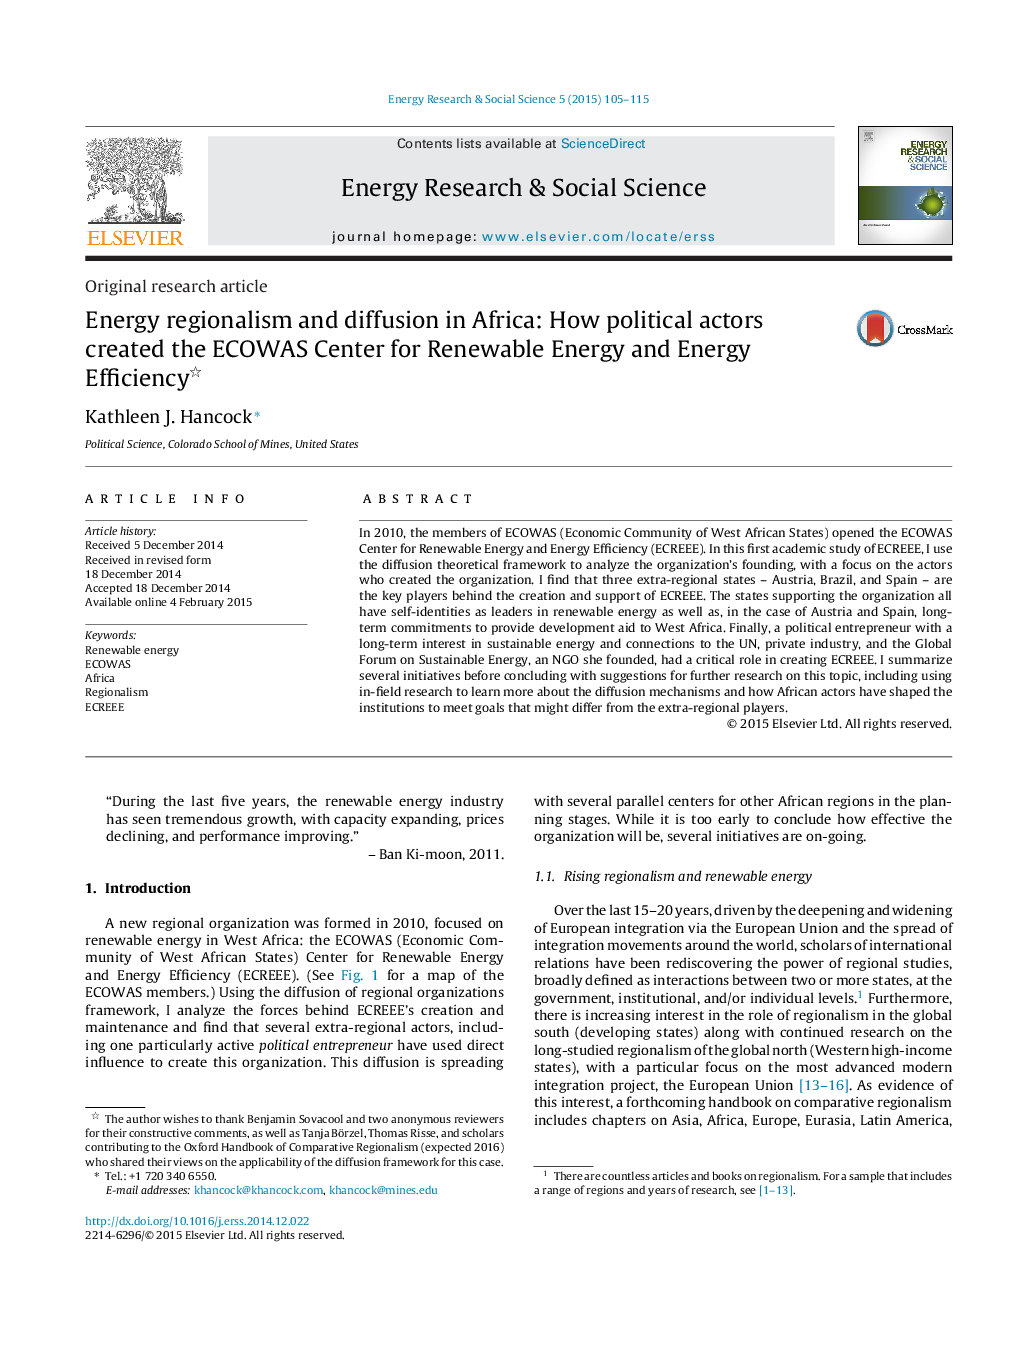 Energy regionalism and diffusion in Africa: How political actors created the ECOWAS Center for Renewable Energy and Energy Efficiency